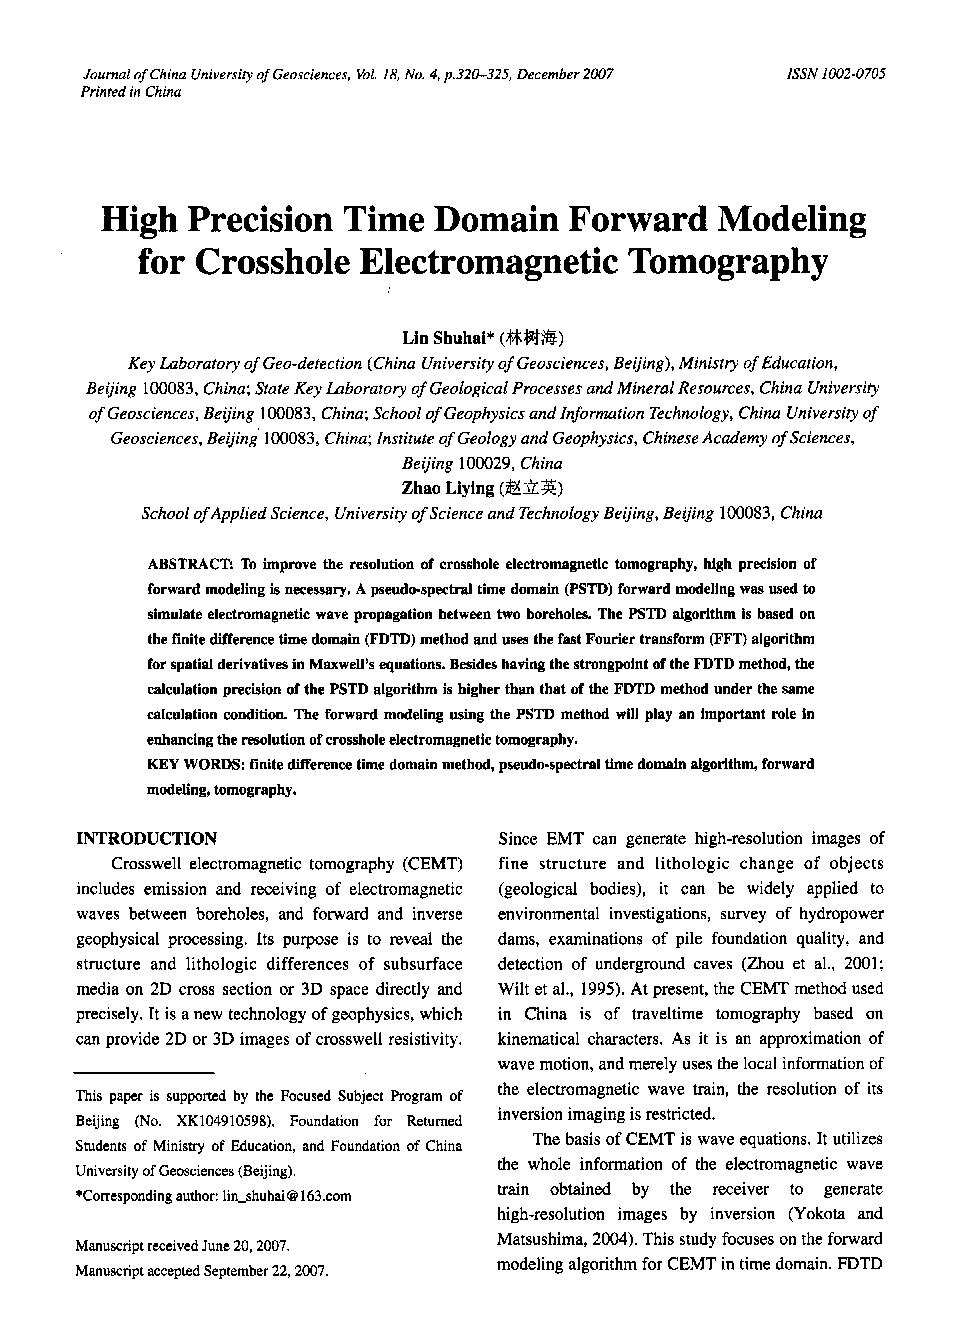 High Precision Time Domain Forward Modeling for Crosshole Electromagnetic Tomography